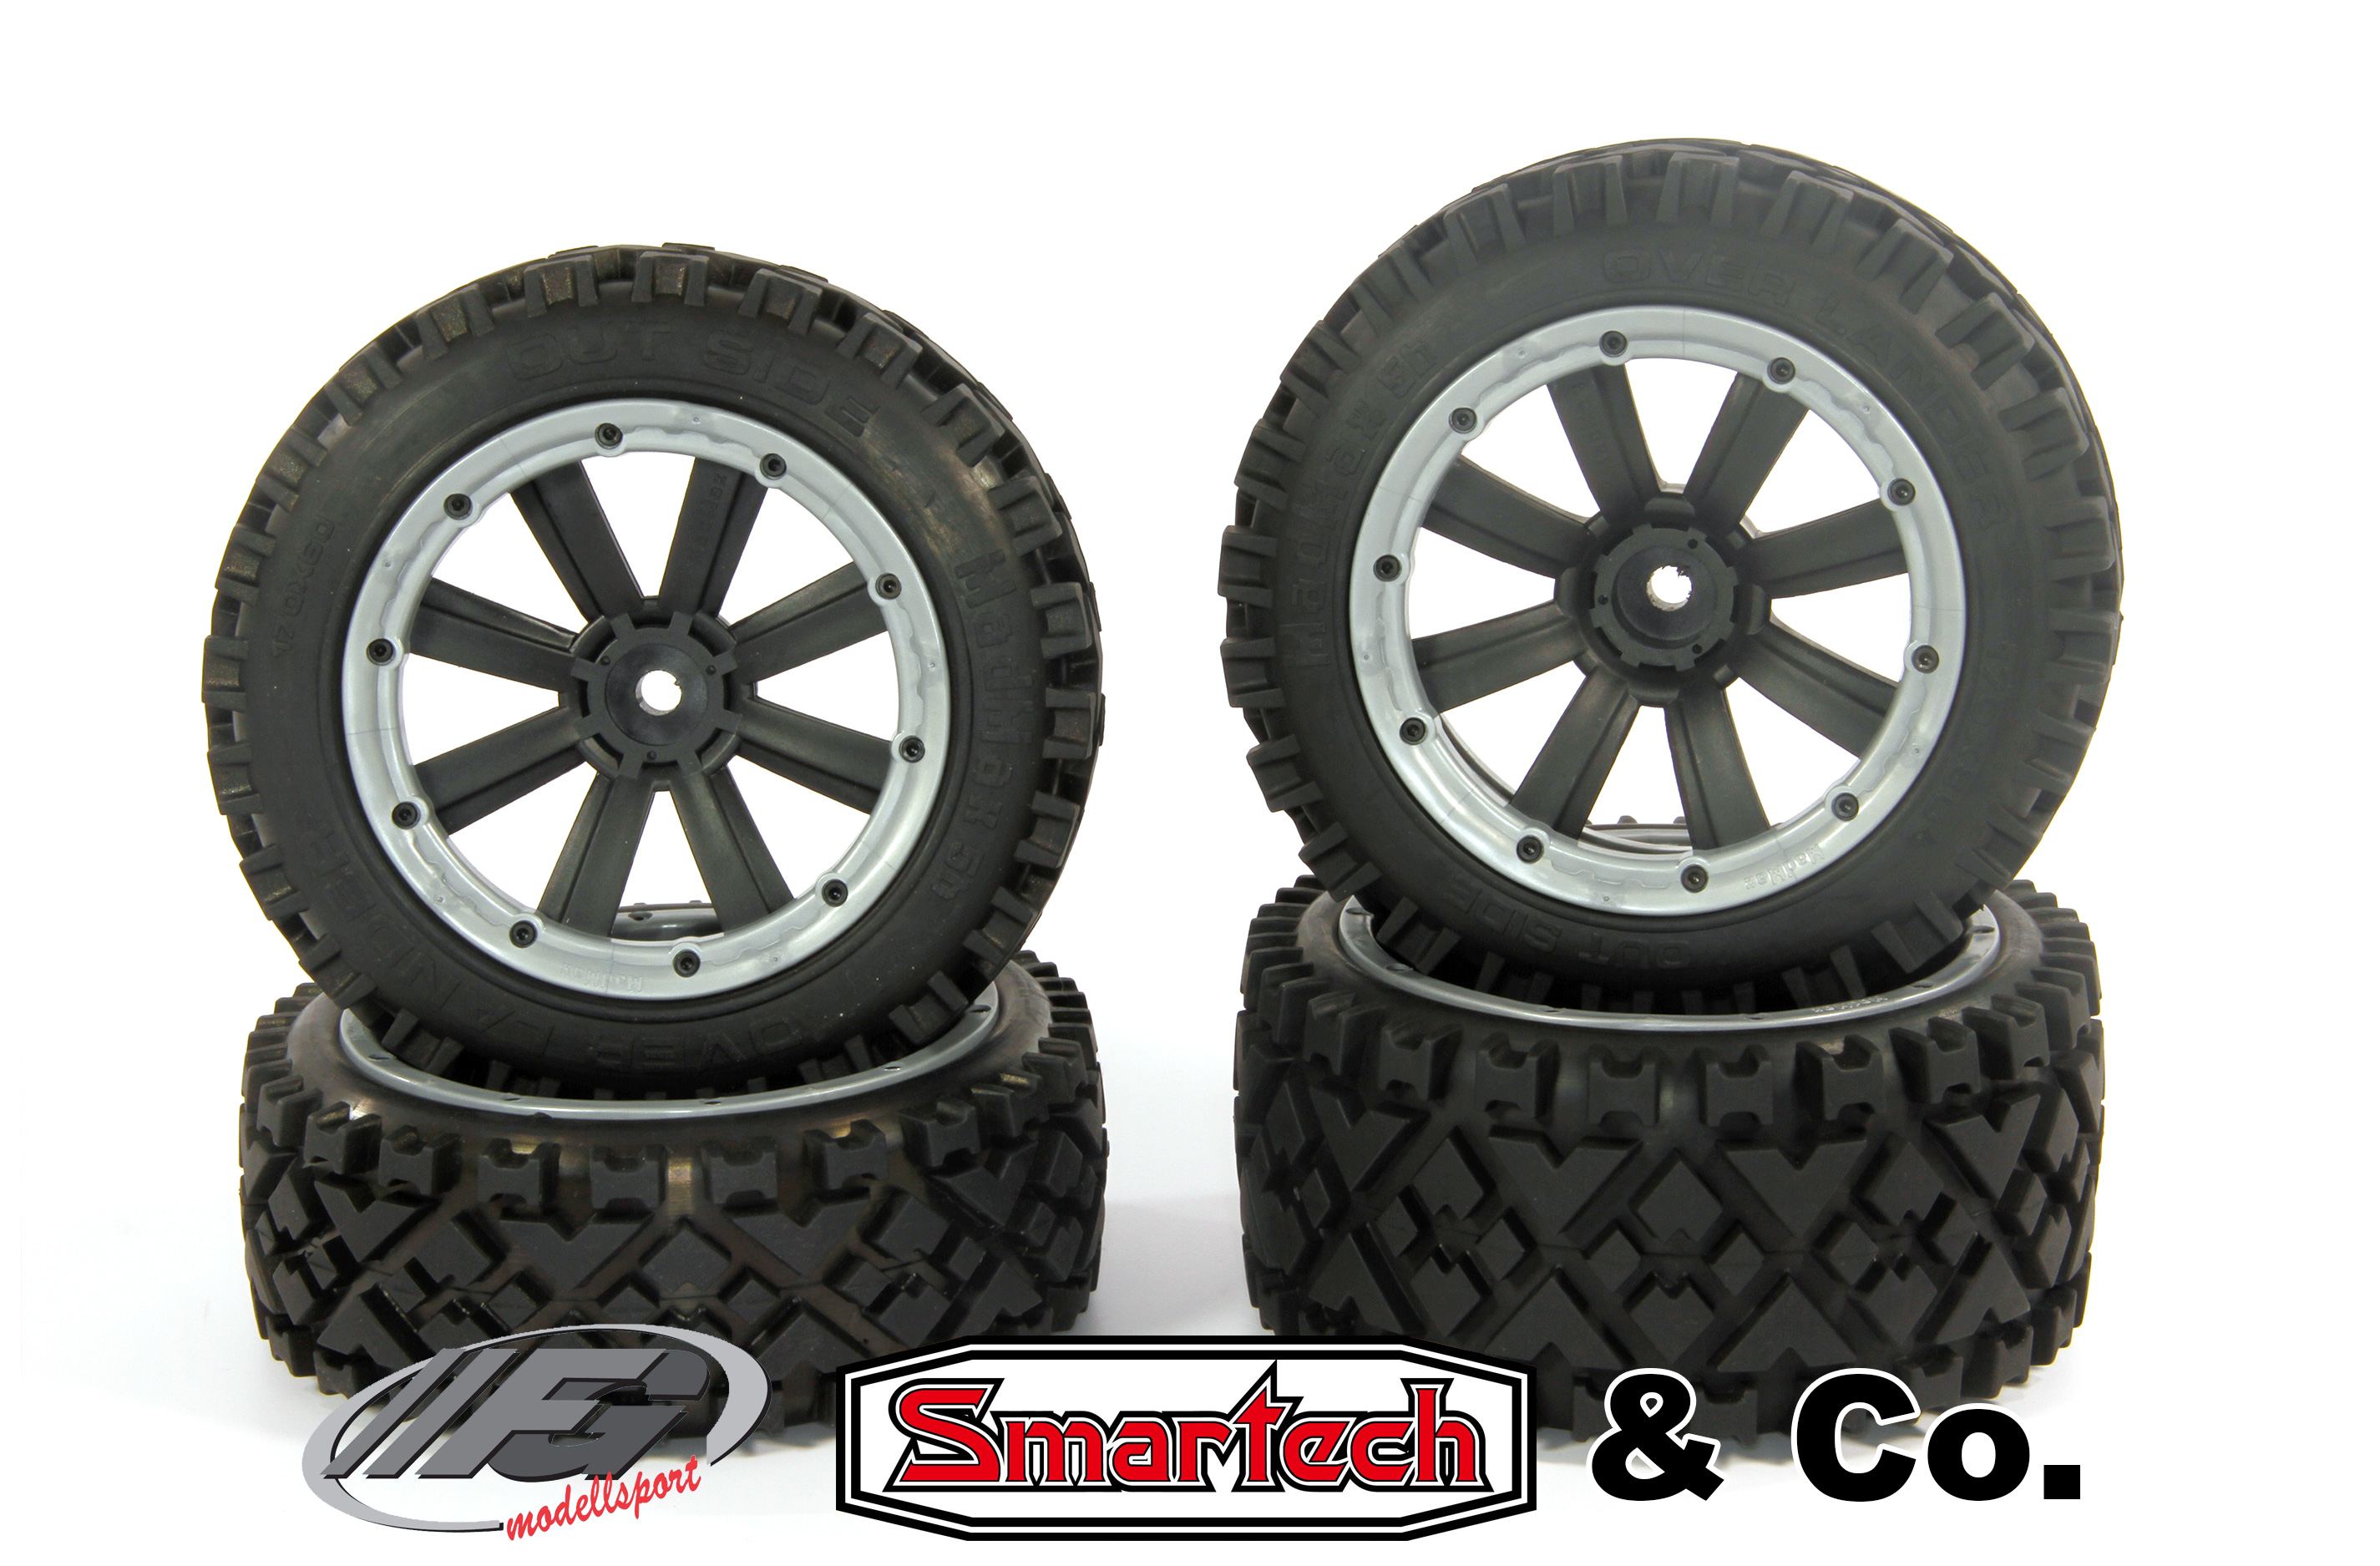 y1403/01 MadMax OVER LANDER 170x80/x60 tires for FG/Smartech and other (18 mm square drive)